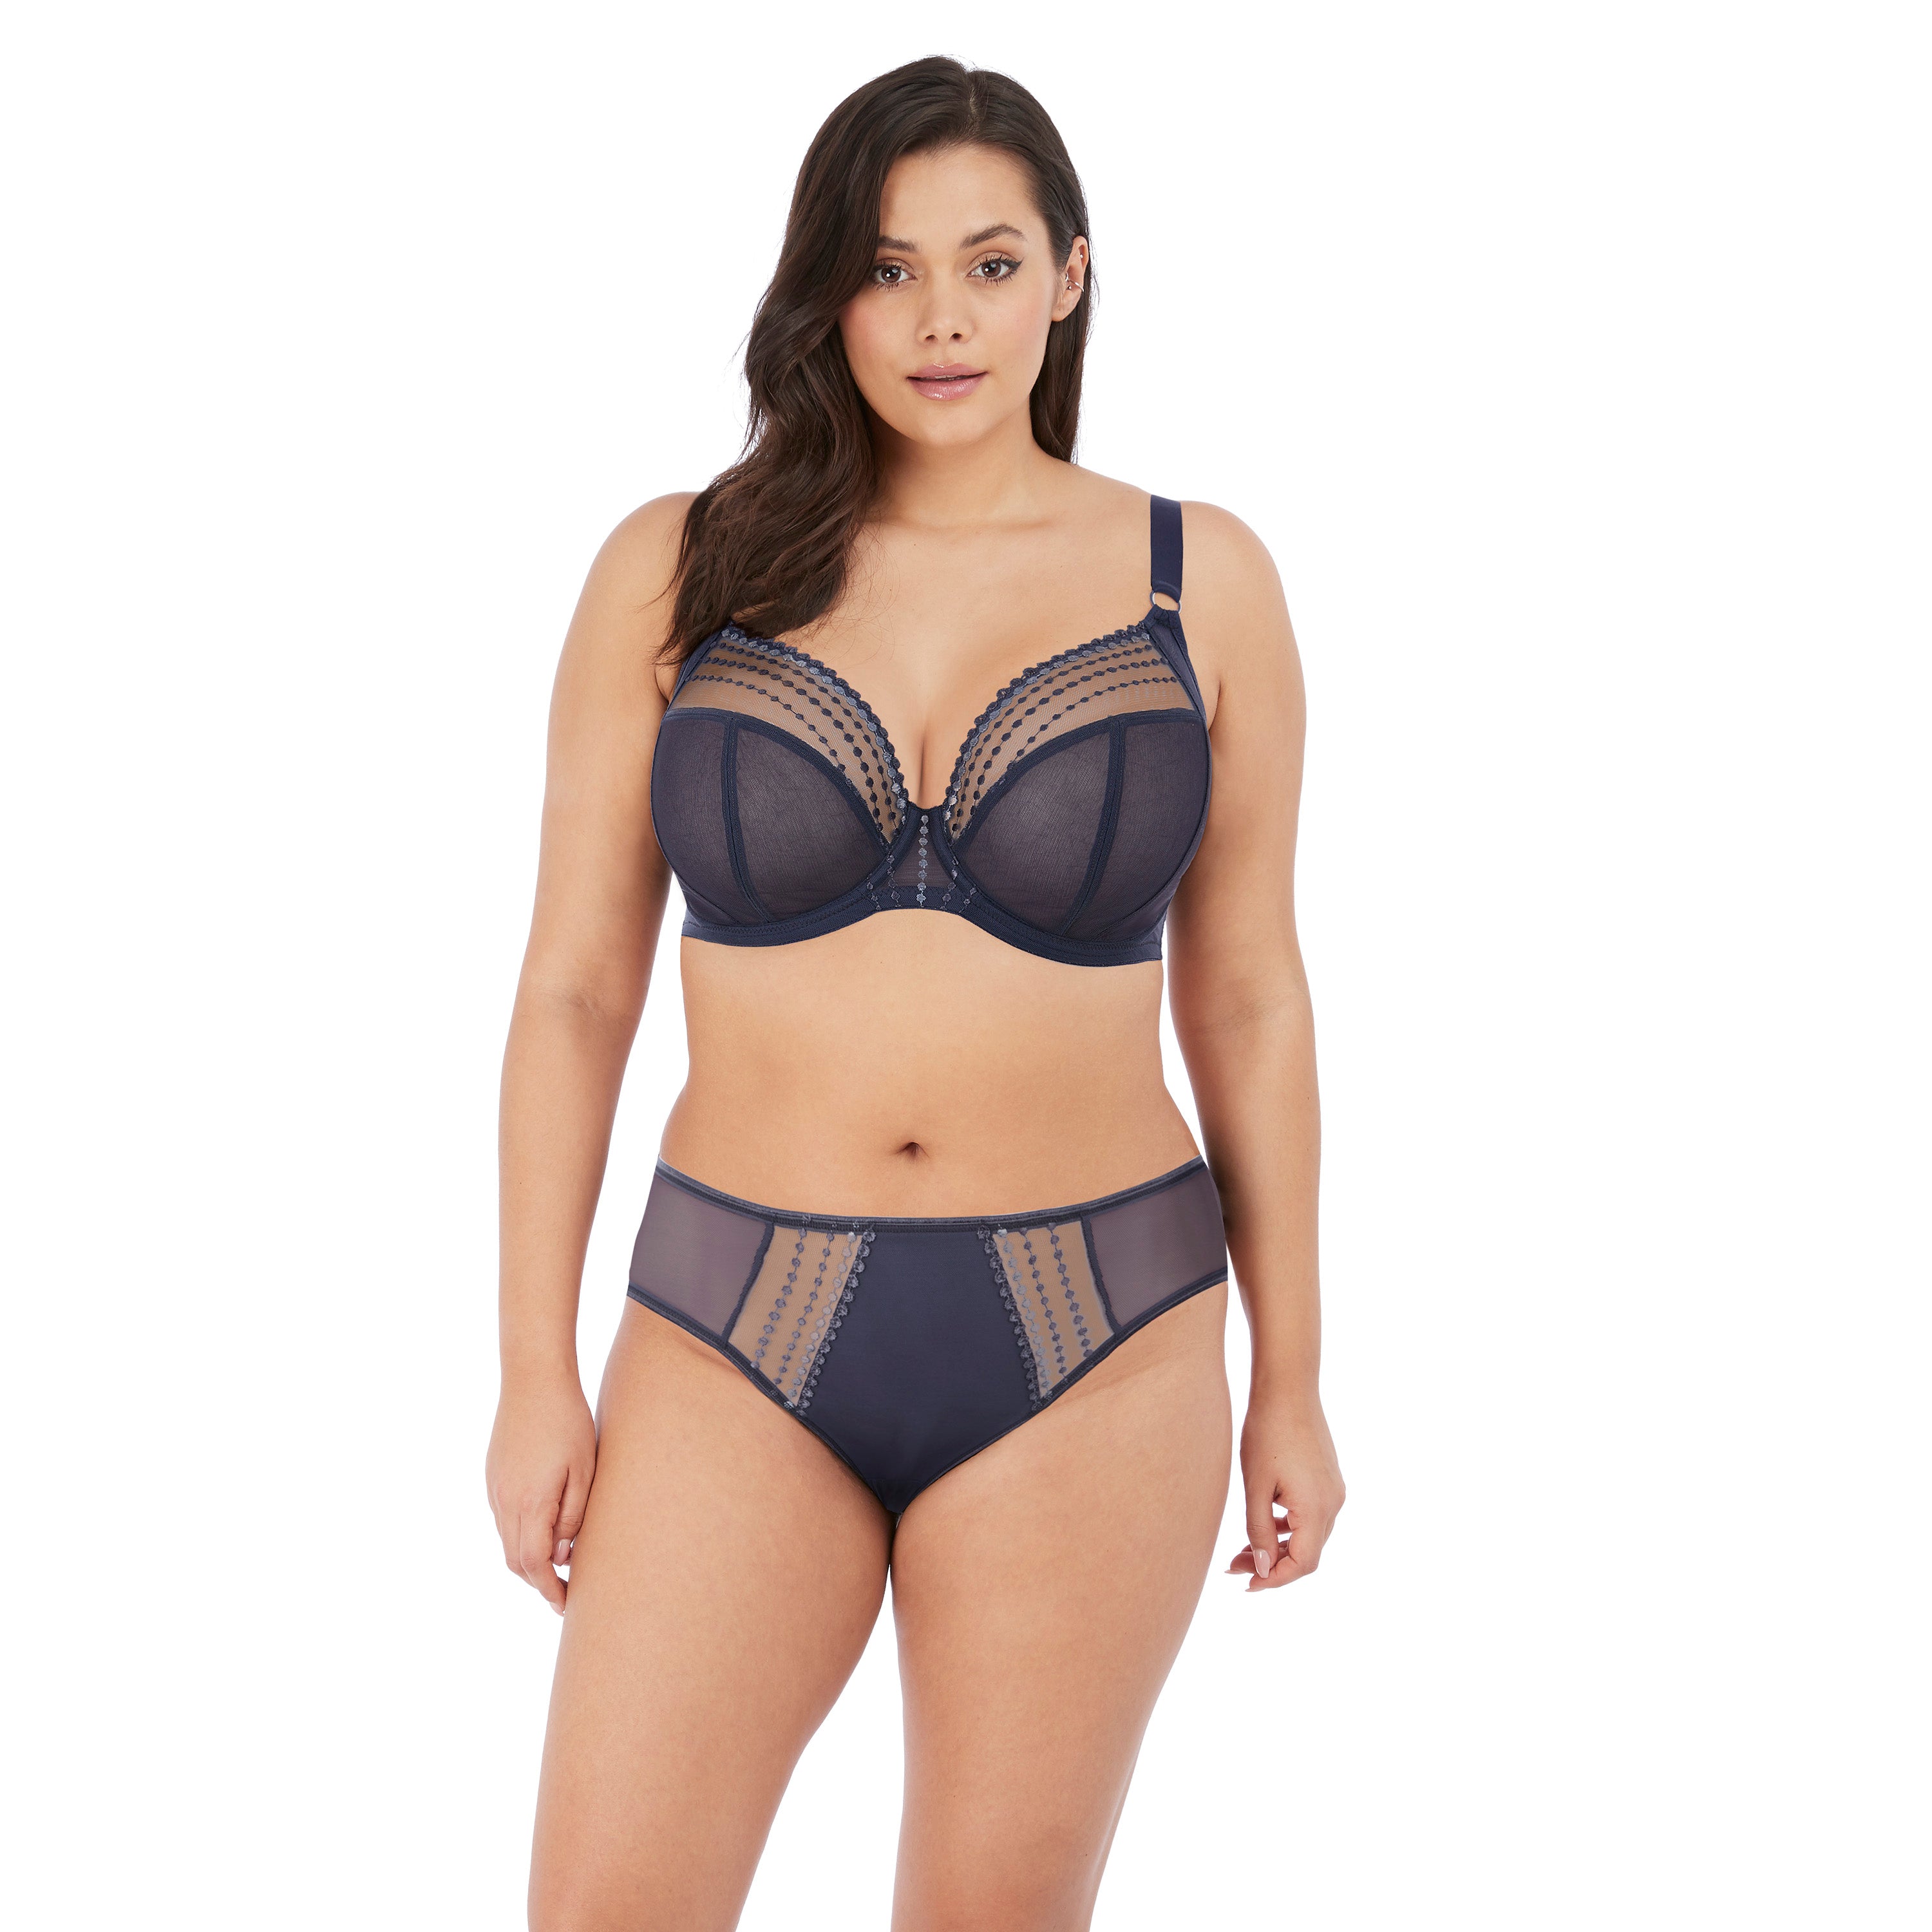 Elomi Lace 8900 Matilda Full Coverage Bra US 34L Side Support Underwired